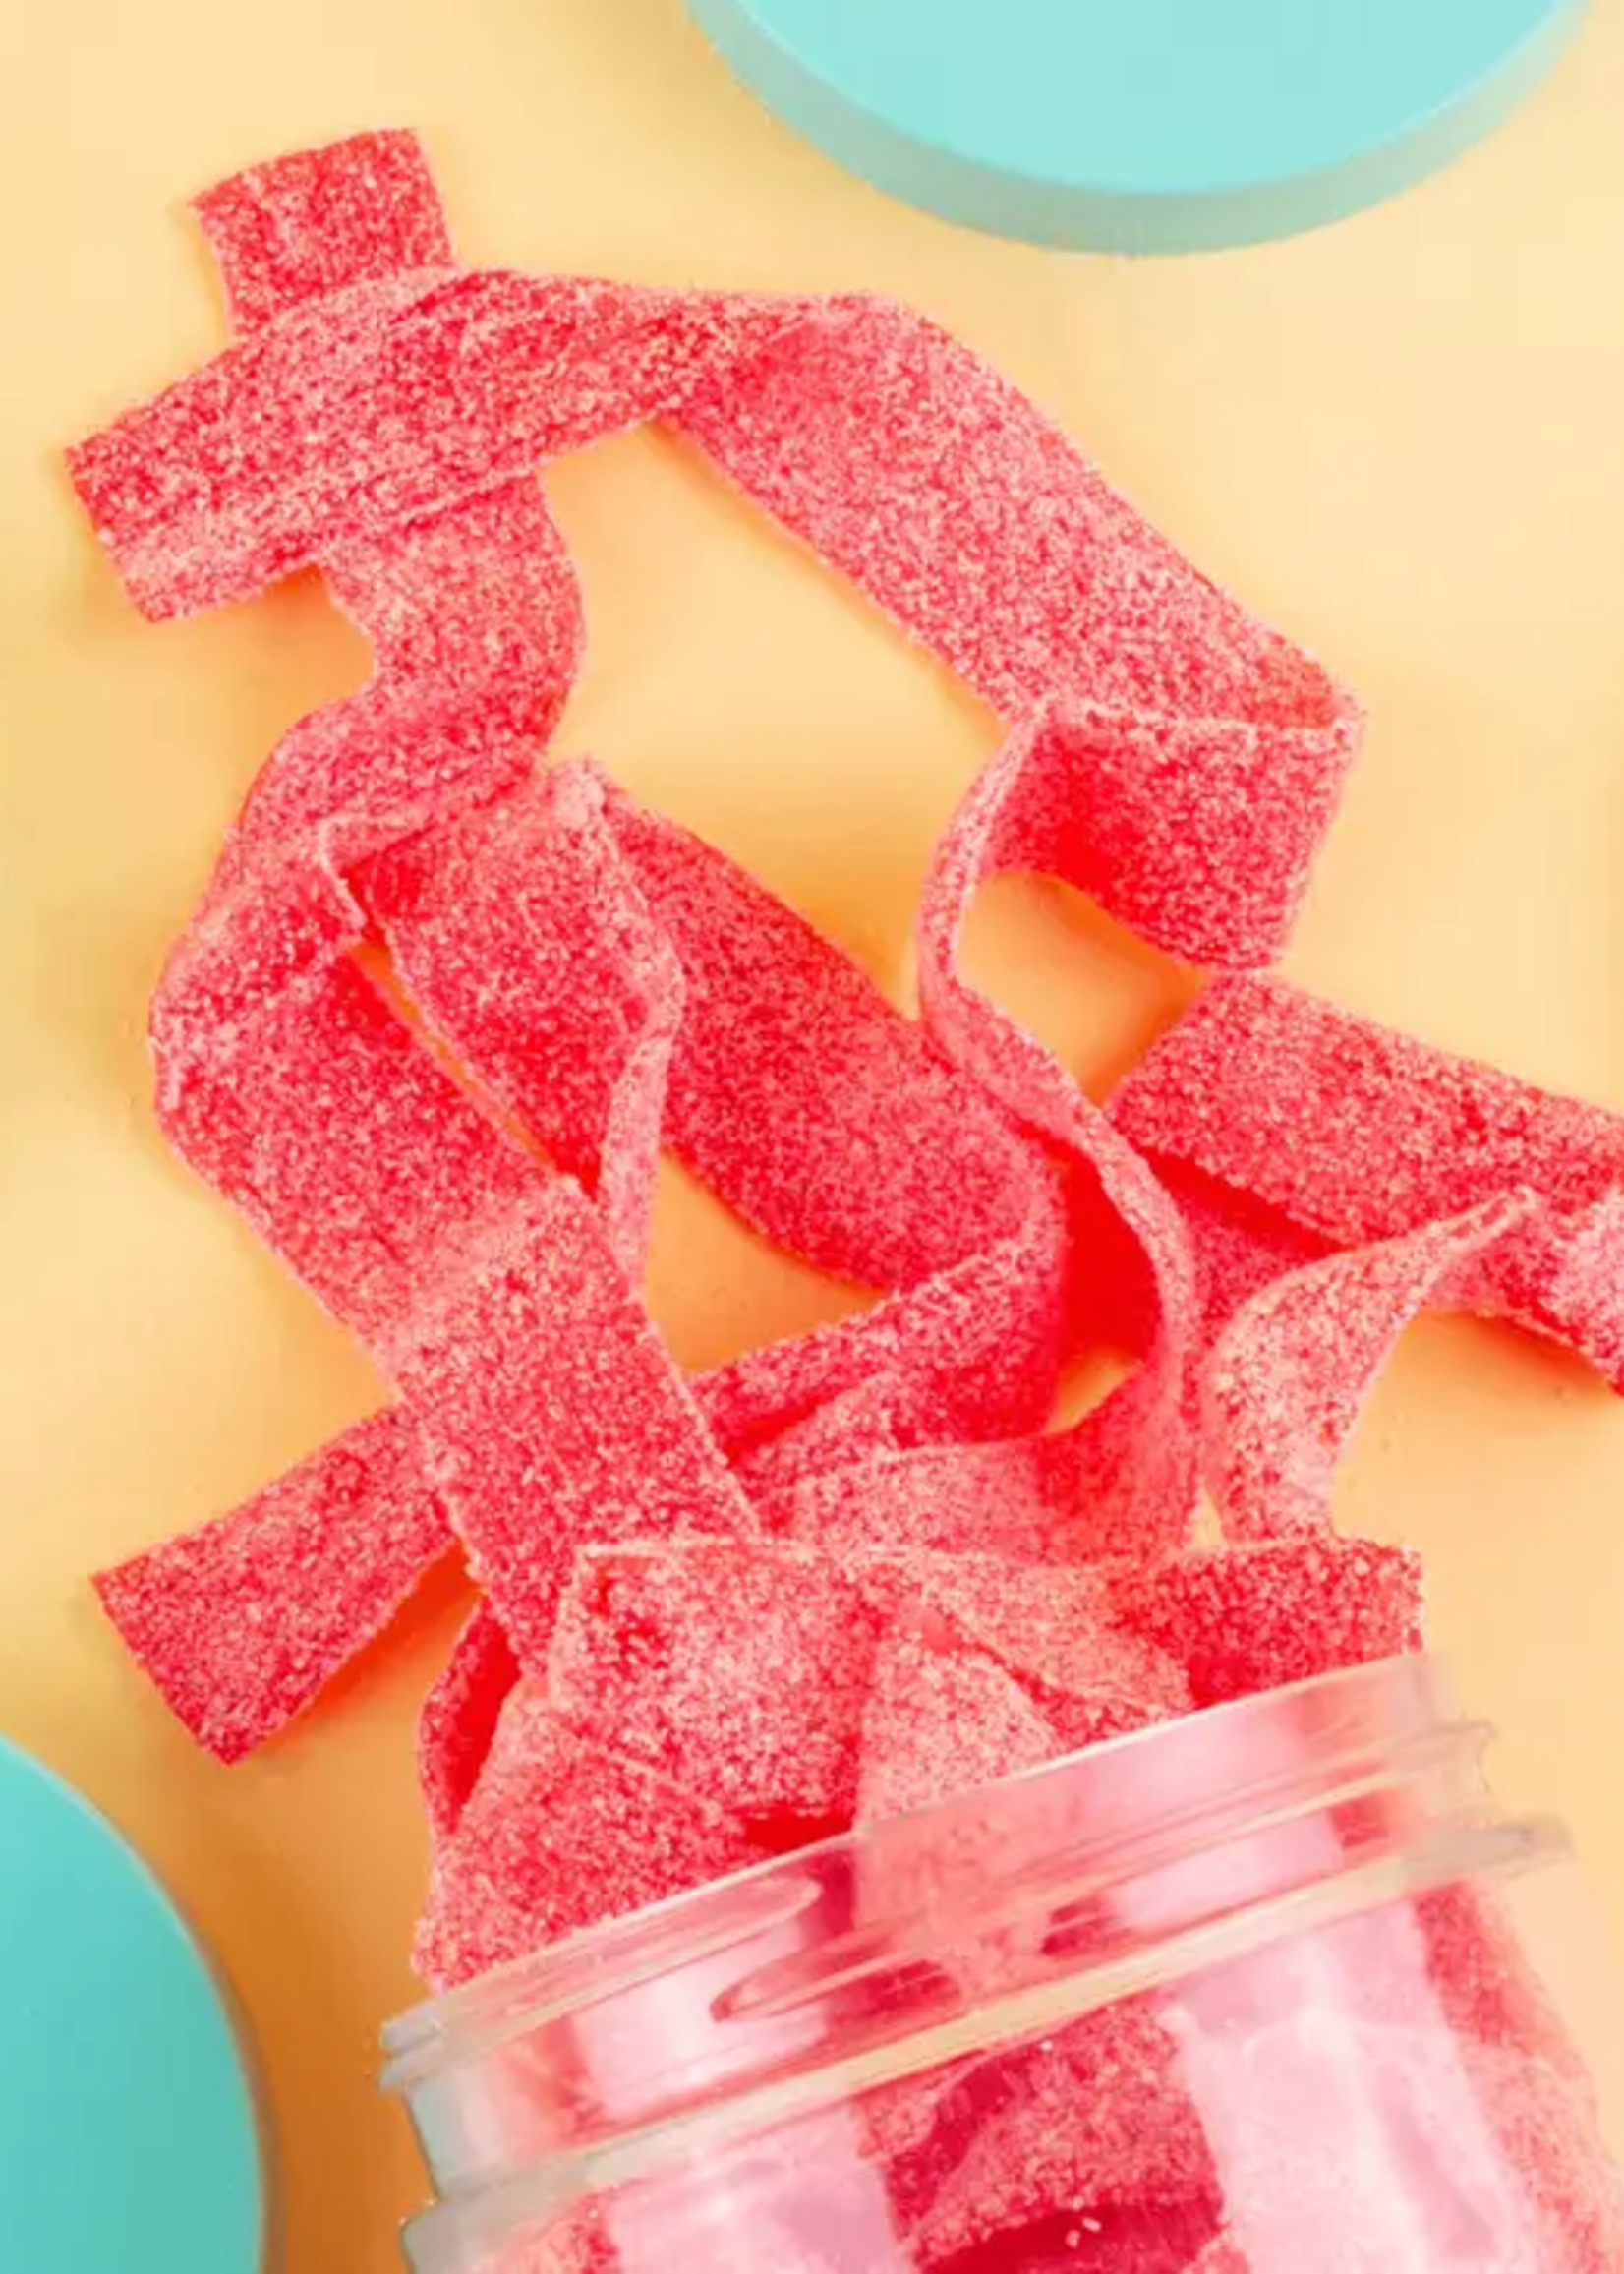 candy club Strawberry Sour Belt Candies